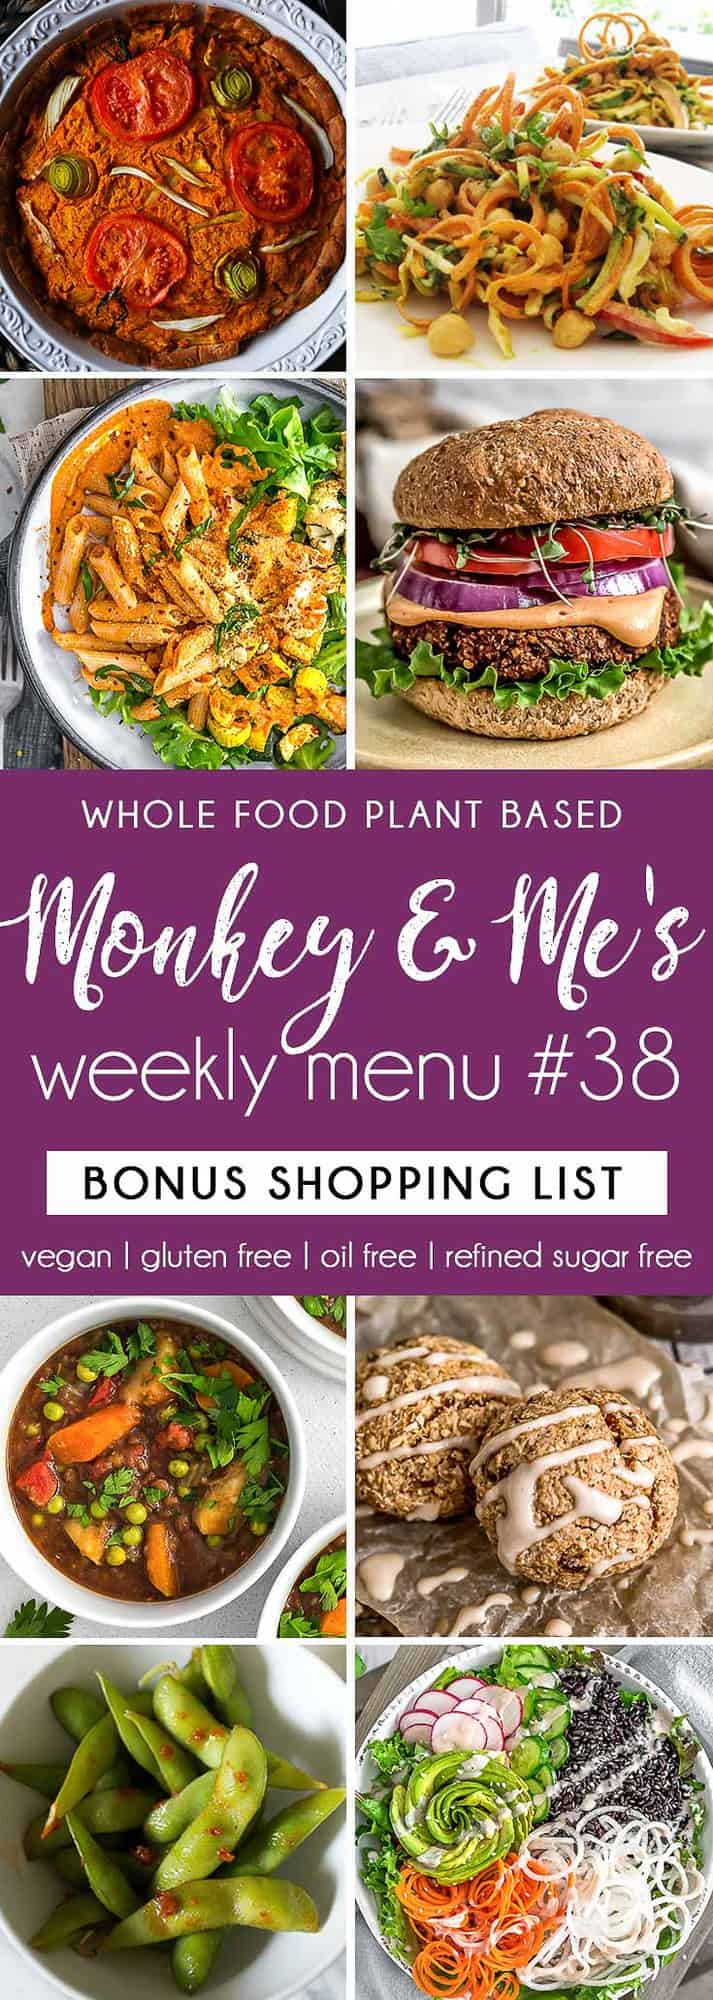 Monkey and Me's Menu 38 featuring 8 recipes